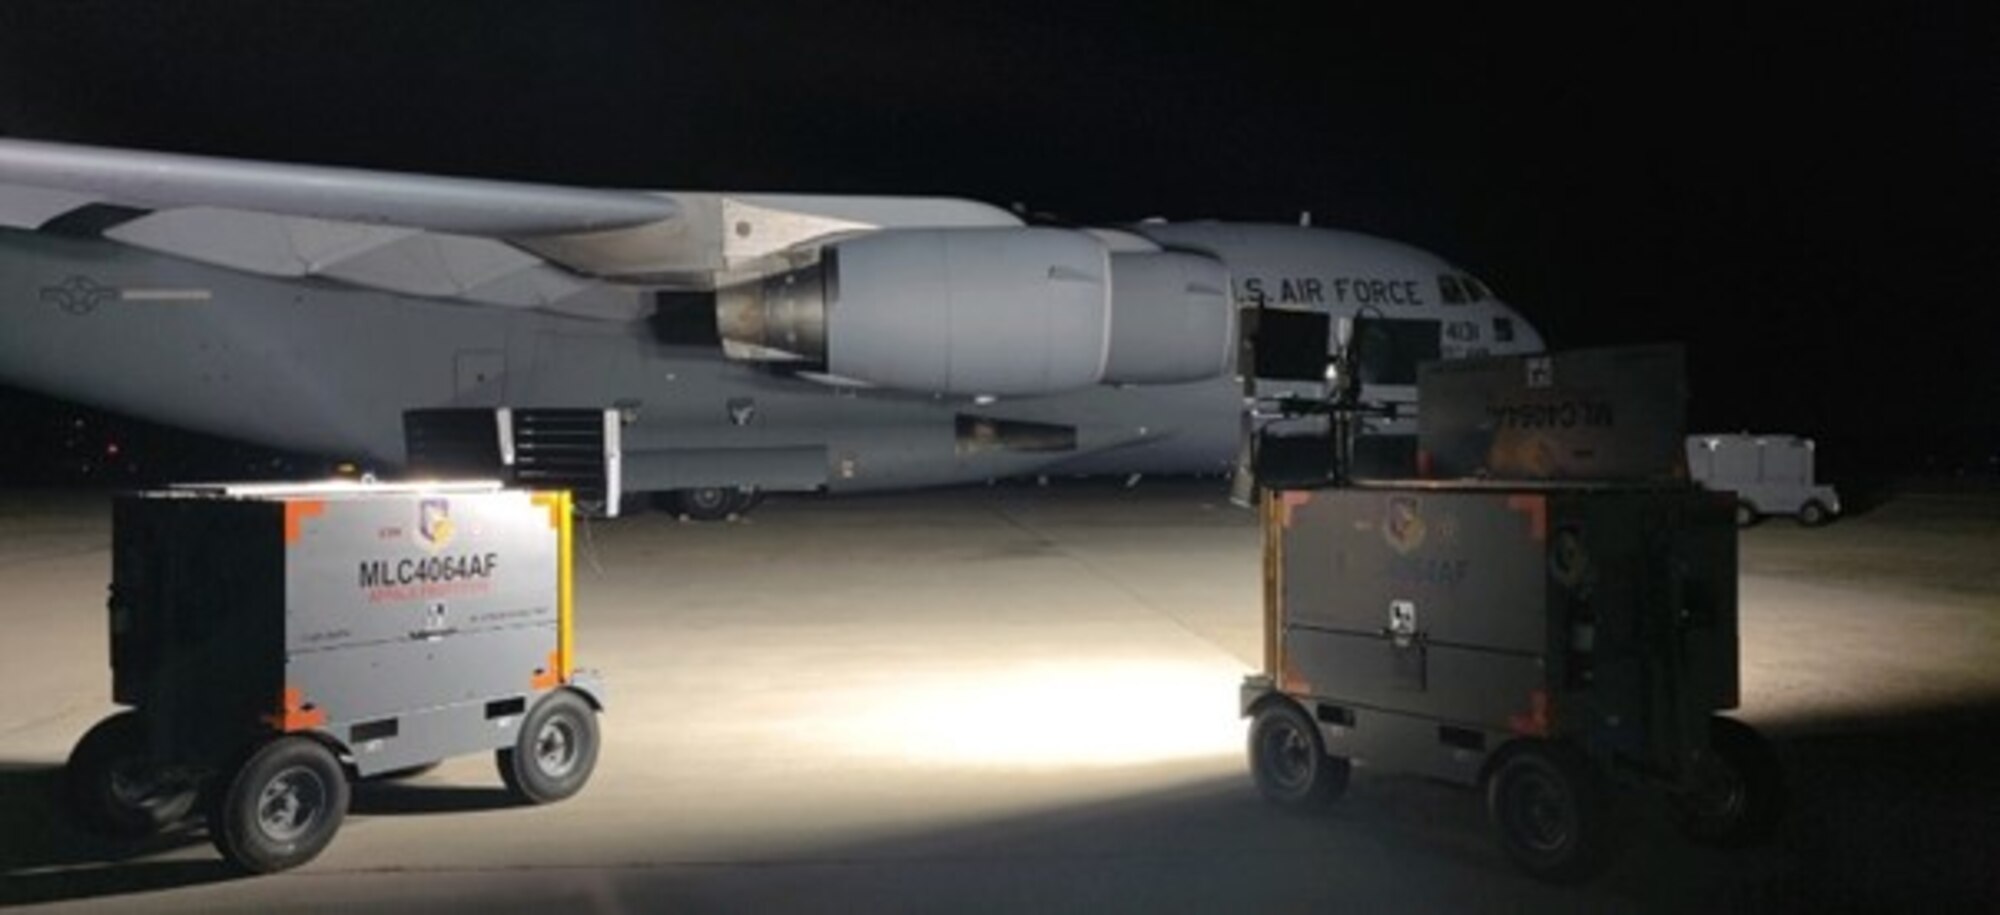 Two different LED lamps were evaluated on the Joint Base McGuire-Dix-Lakehurst flight line during the demonstration. (U.S. Air Force photo/Master Sgt. John Bono)